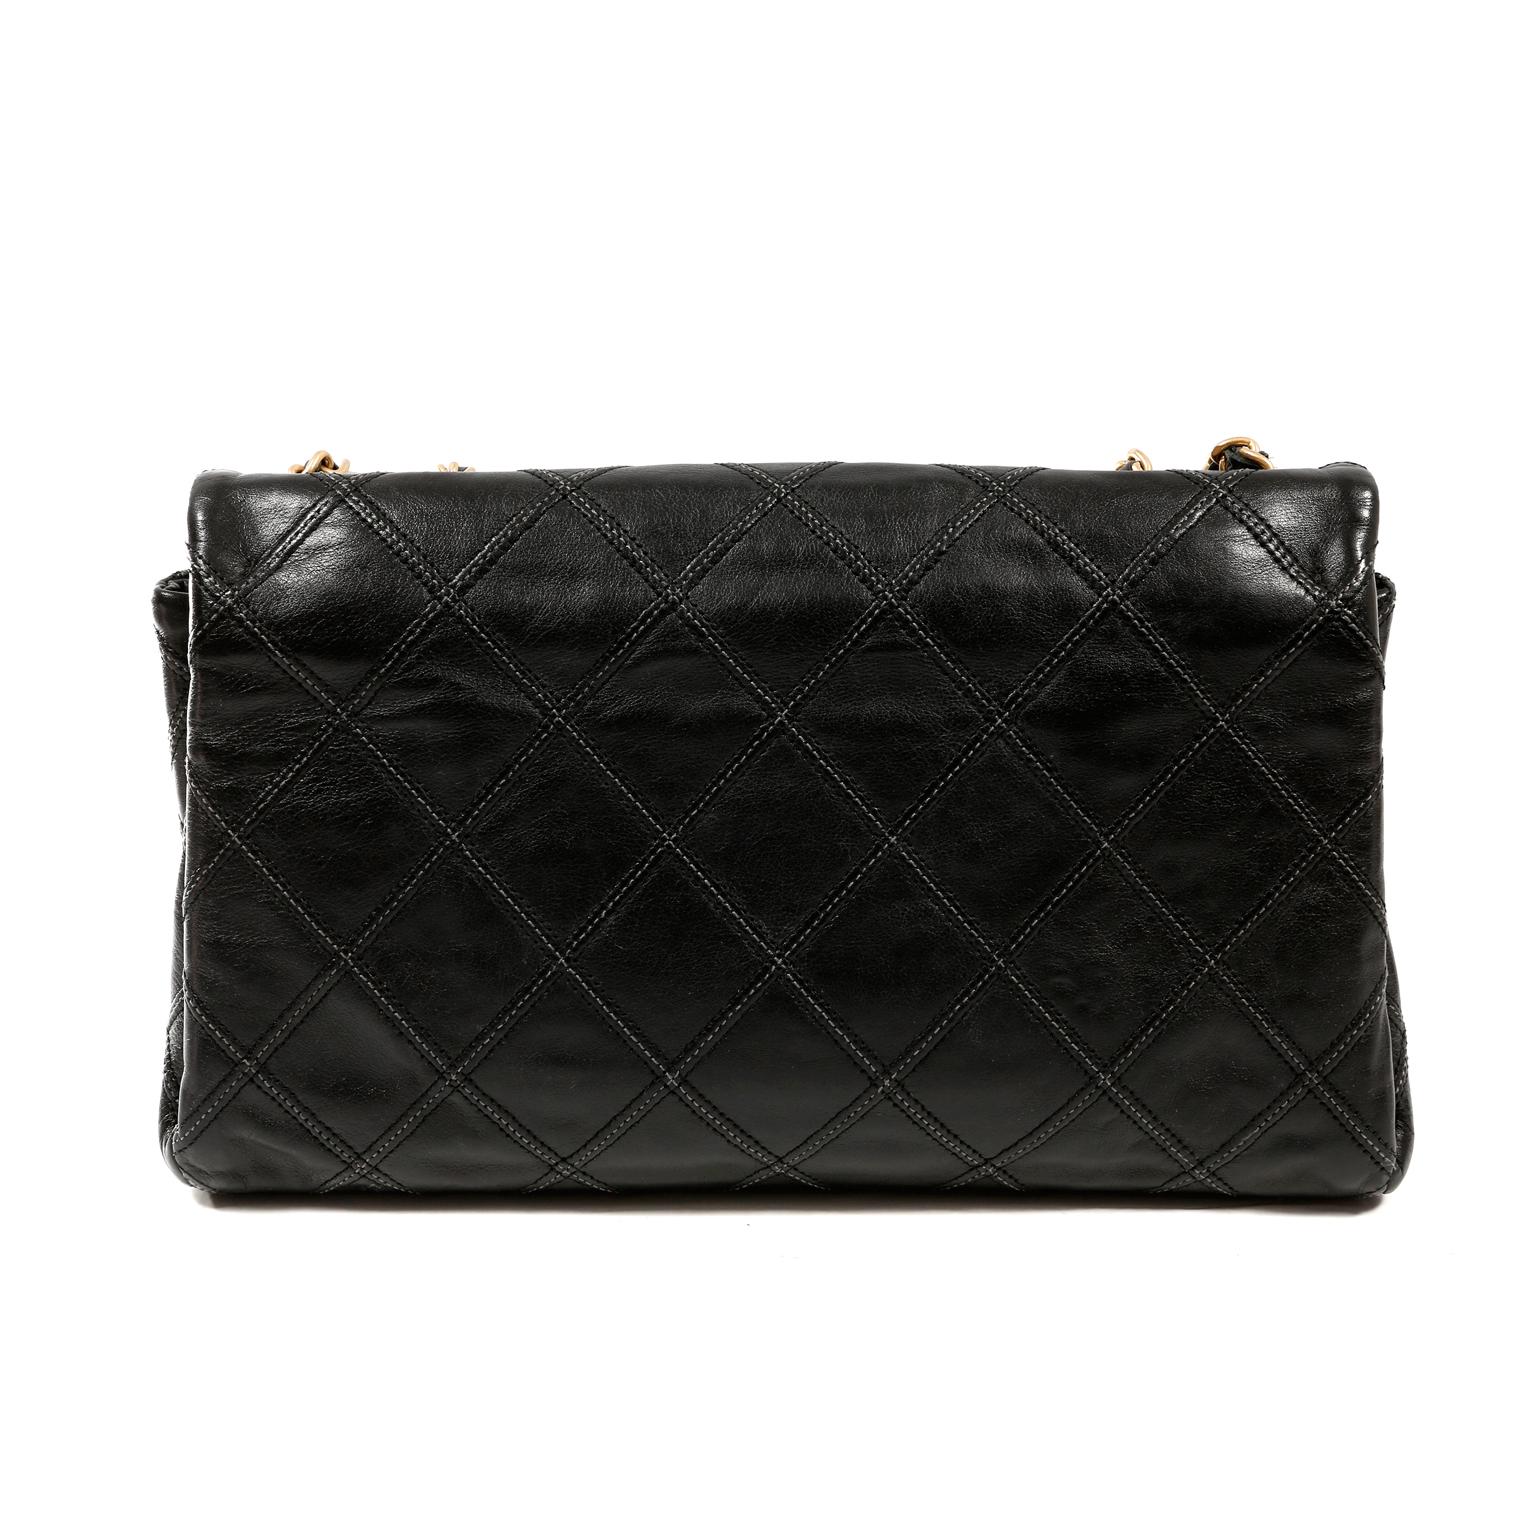 This authentic Chanel Black Flat Stitched Leather Flap Bag is in very good condition.  A variation of the Classic Flap, this versatile medium sized bag has flat stitching and a three-compartment interior.  
Large gold tone interlocking CC twist lock